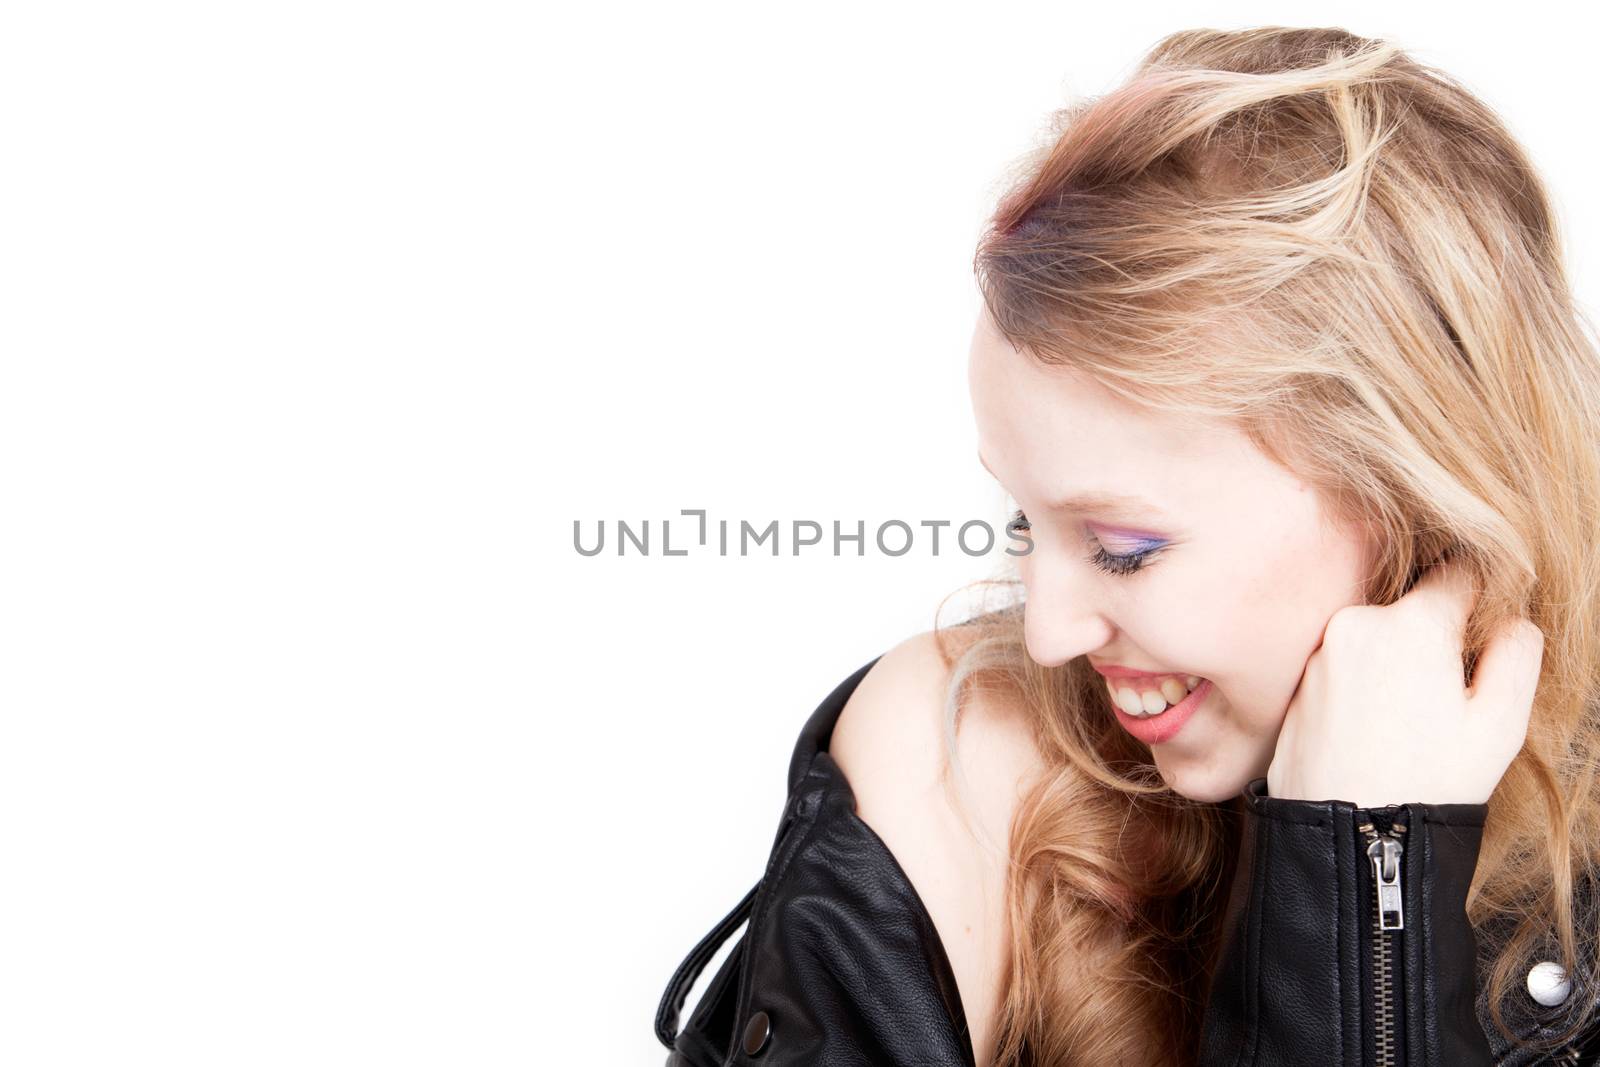 Young tough blond teenage girl with leather jacket on a white background